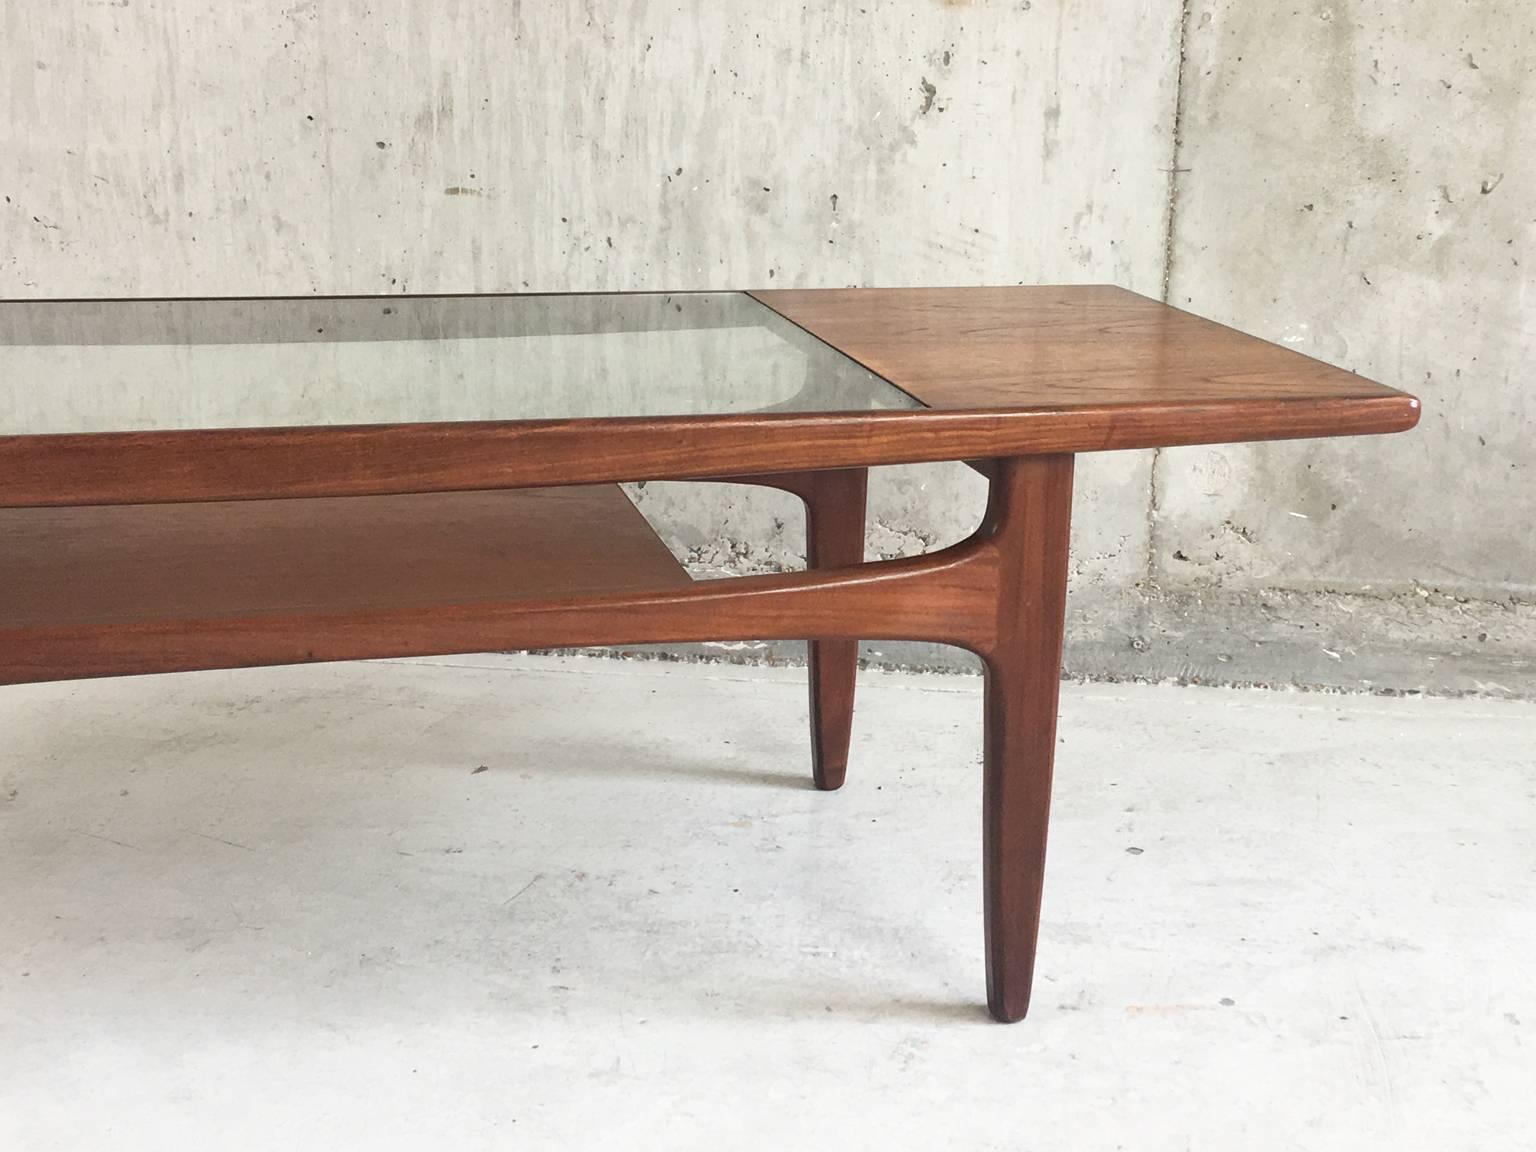 Great Britain (UK) 1970s G Plan Mid-Century Modern Teak Coffee Table with Glass Inset For Sale